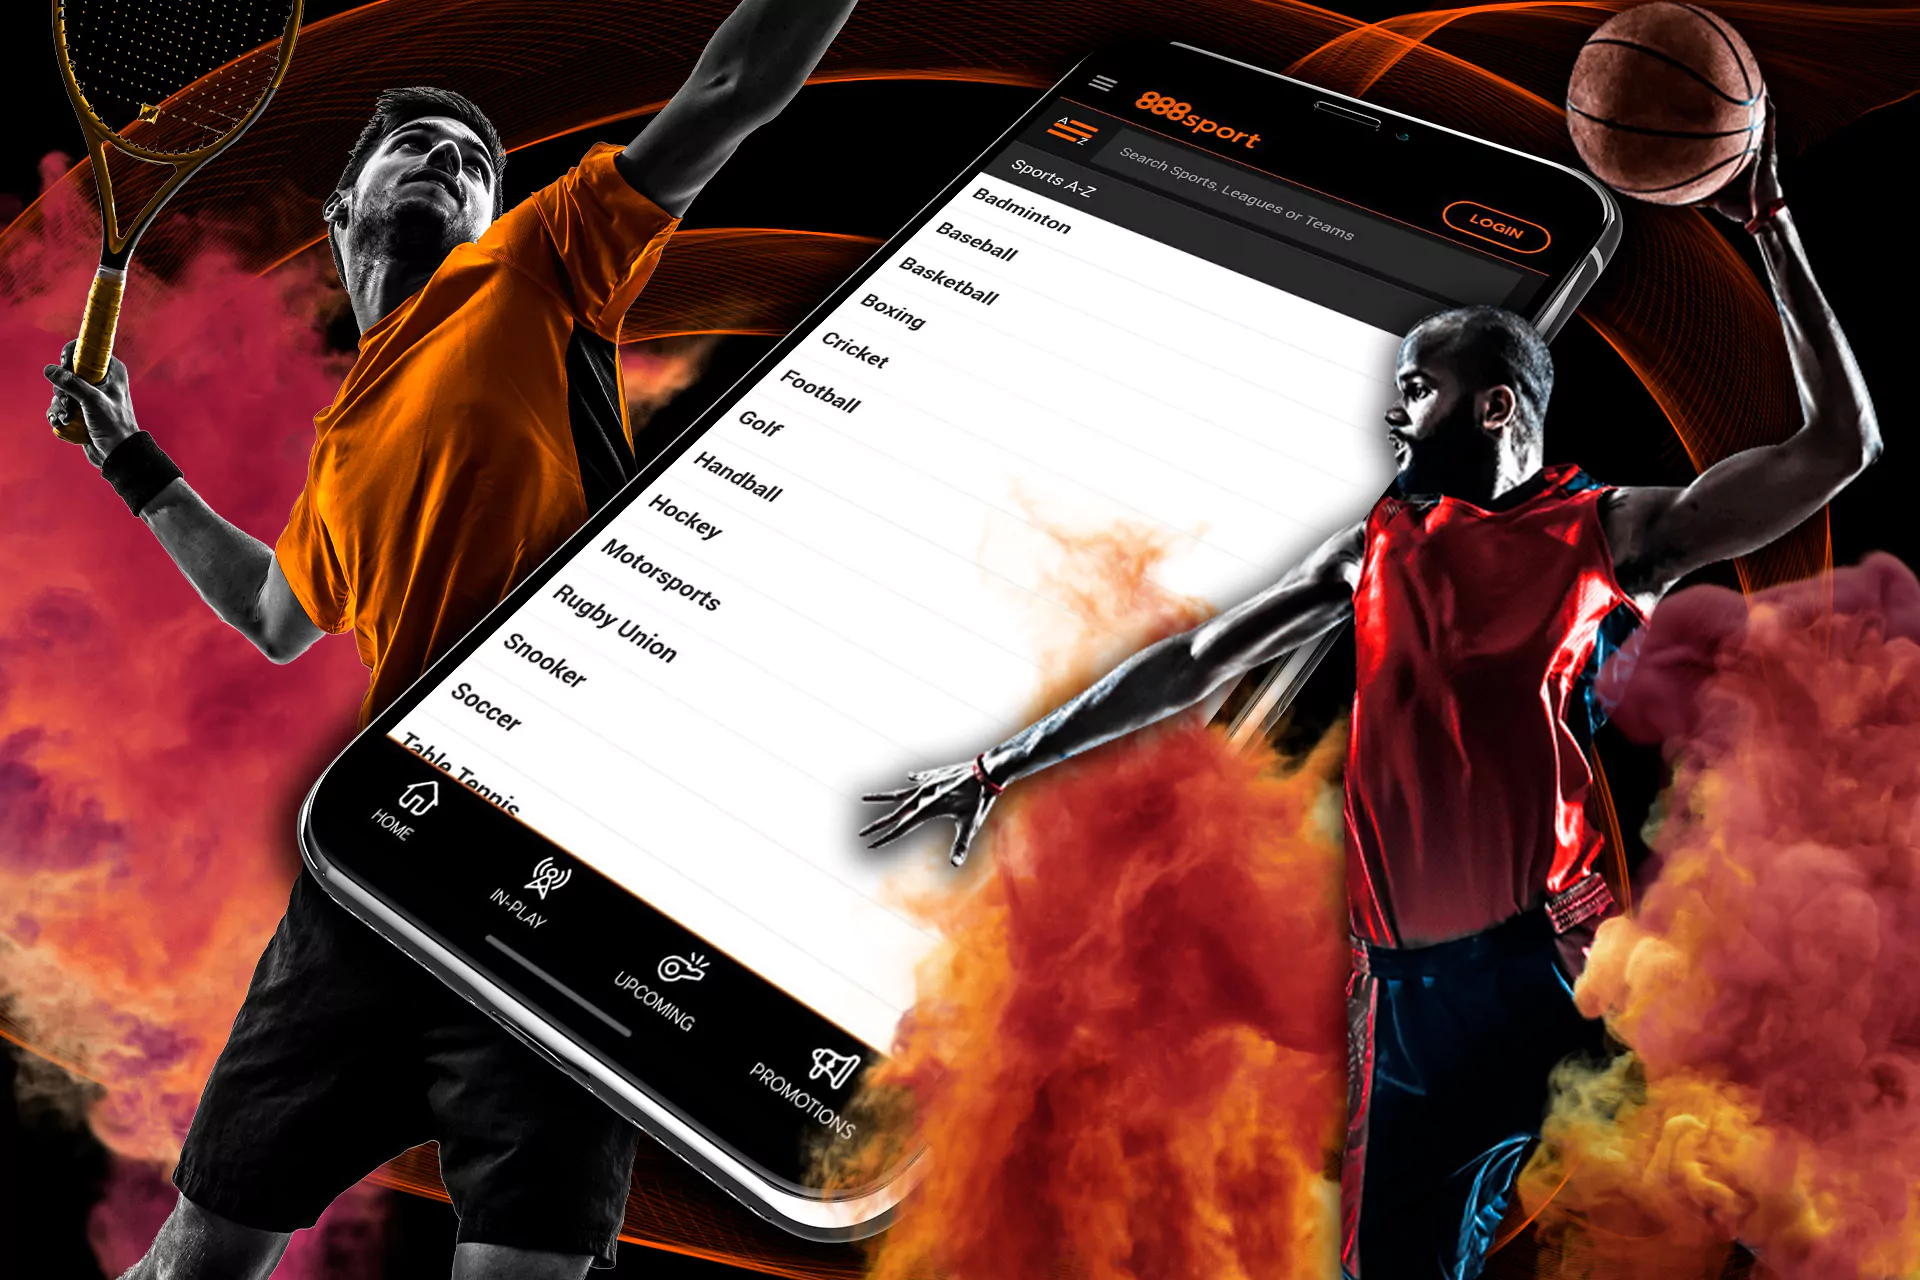 You can bet on your favorite sports disciplines in the 888sport sportsbook.